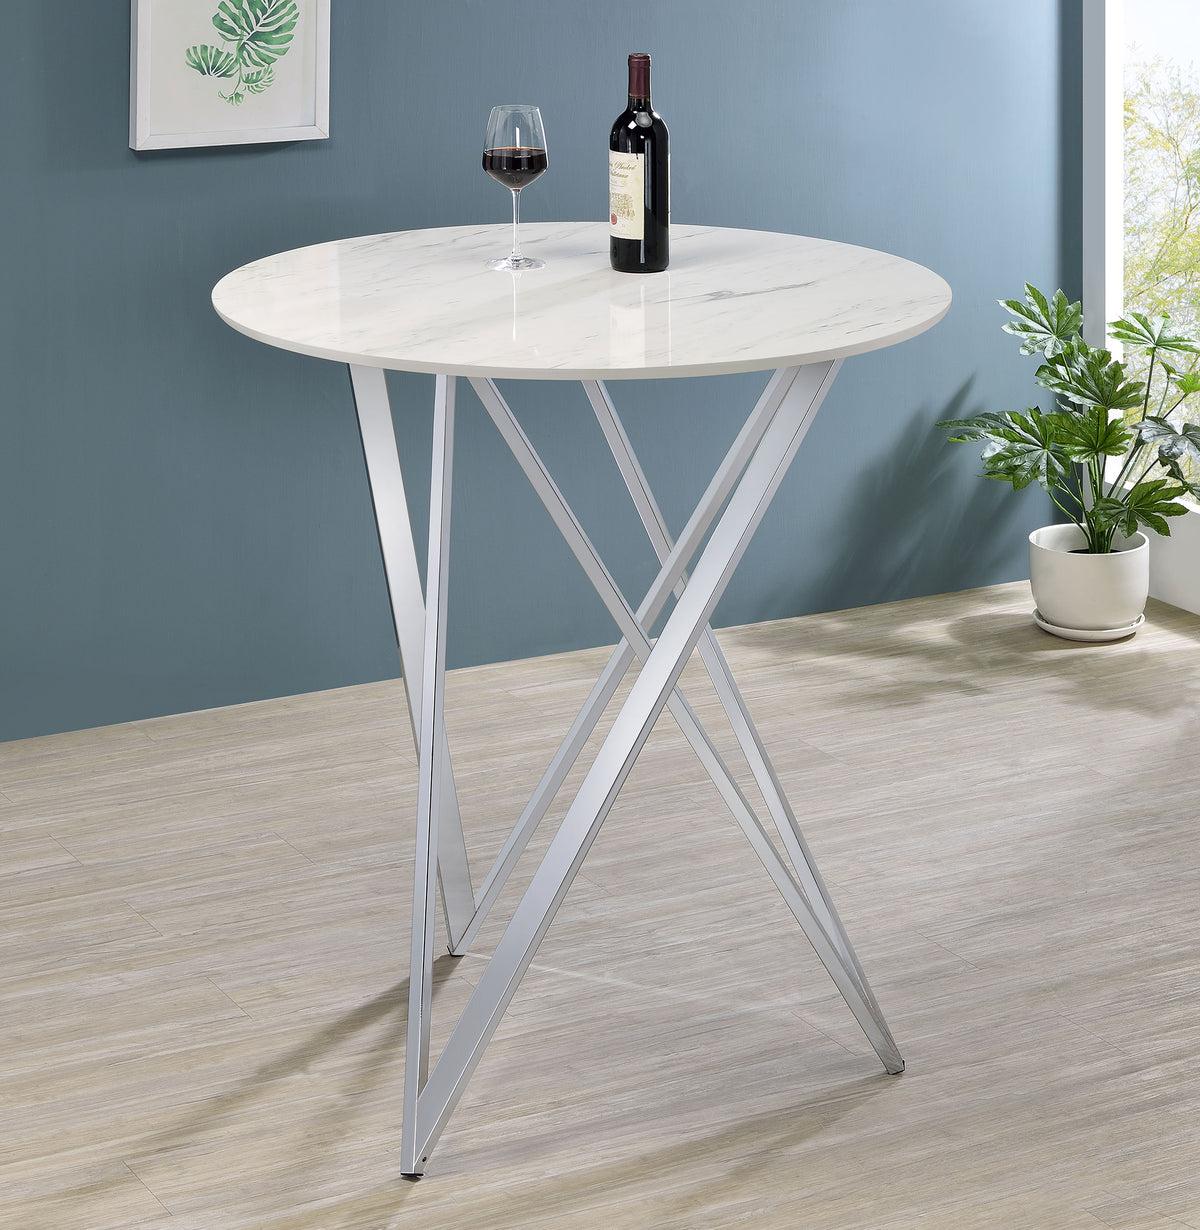 Bexter Faux Marble Round Top Bar Table White and Chrome  Las Vegas Furniture Stores